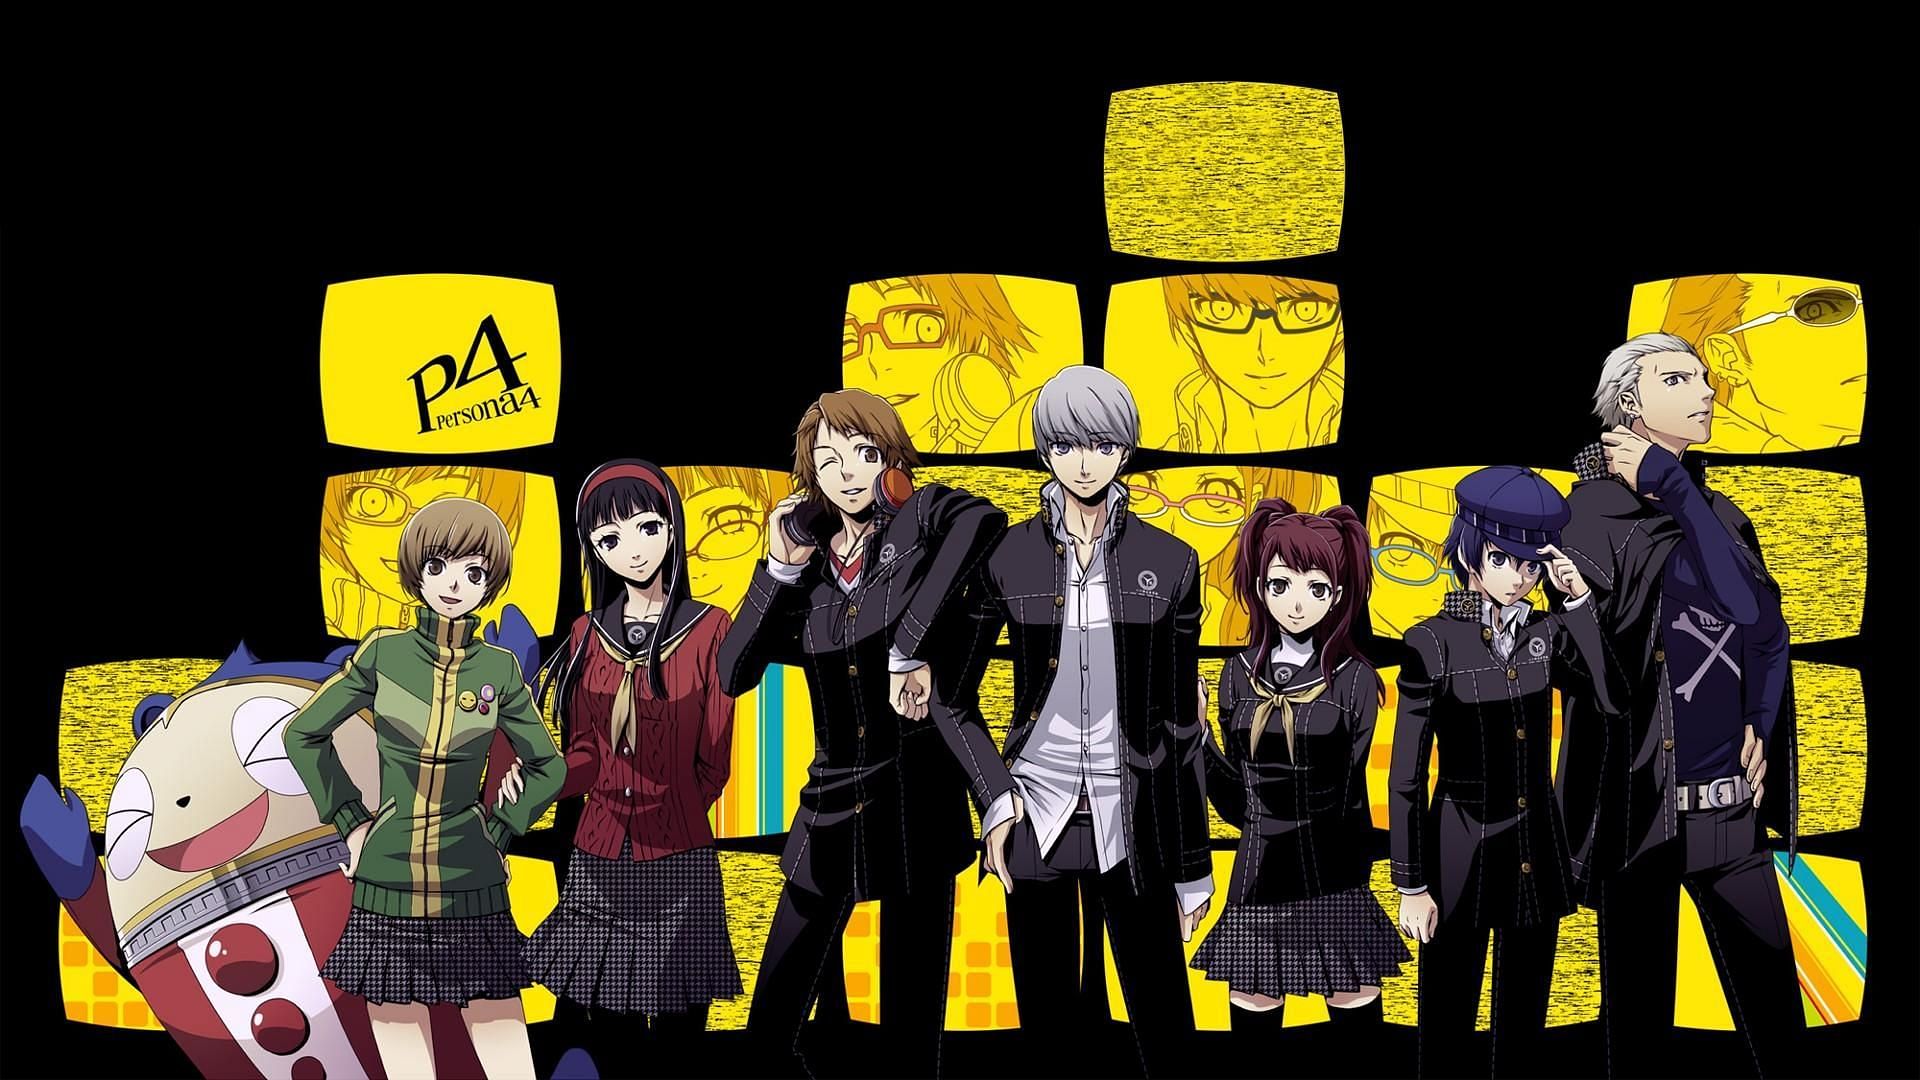 Fans are hoping Persona 4 will also get a remake (Image via Atlus)